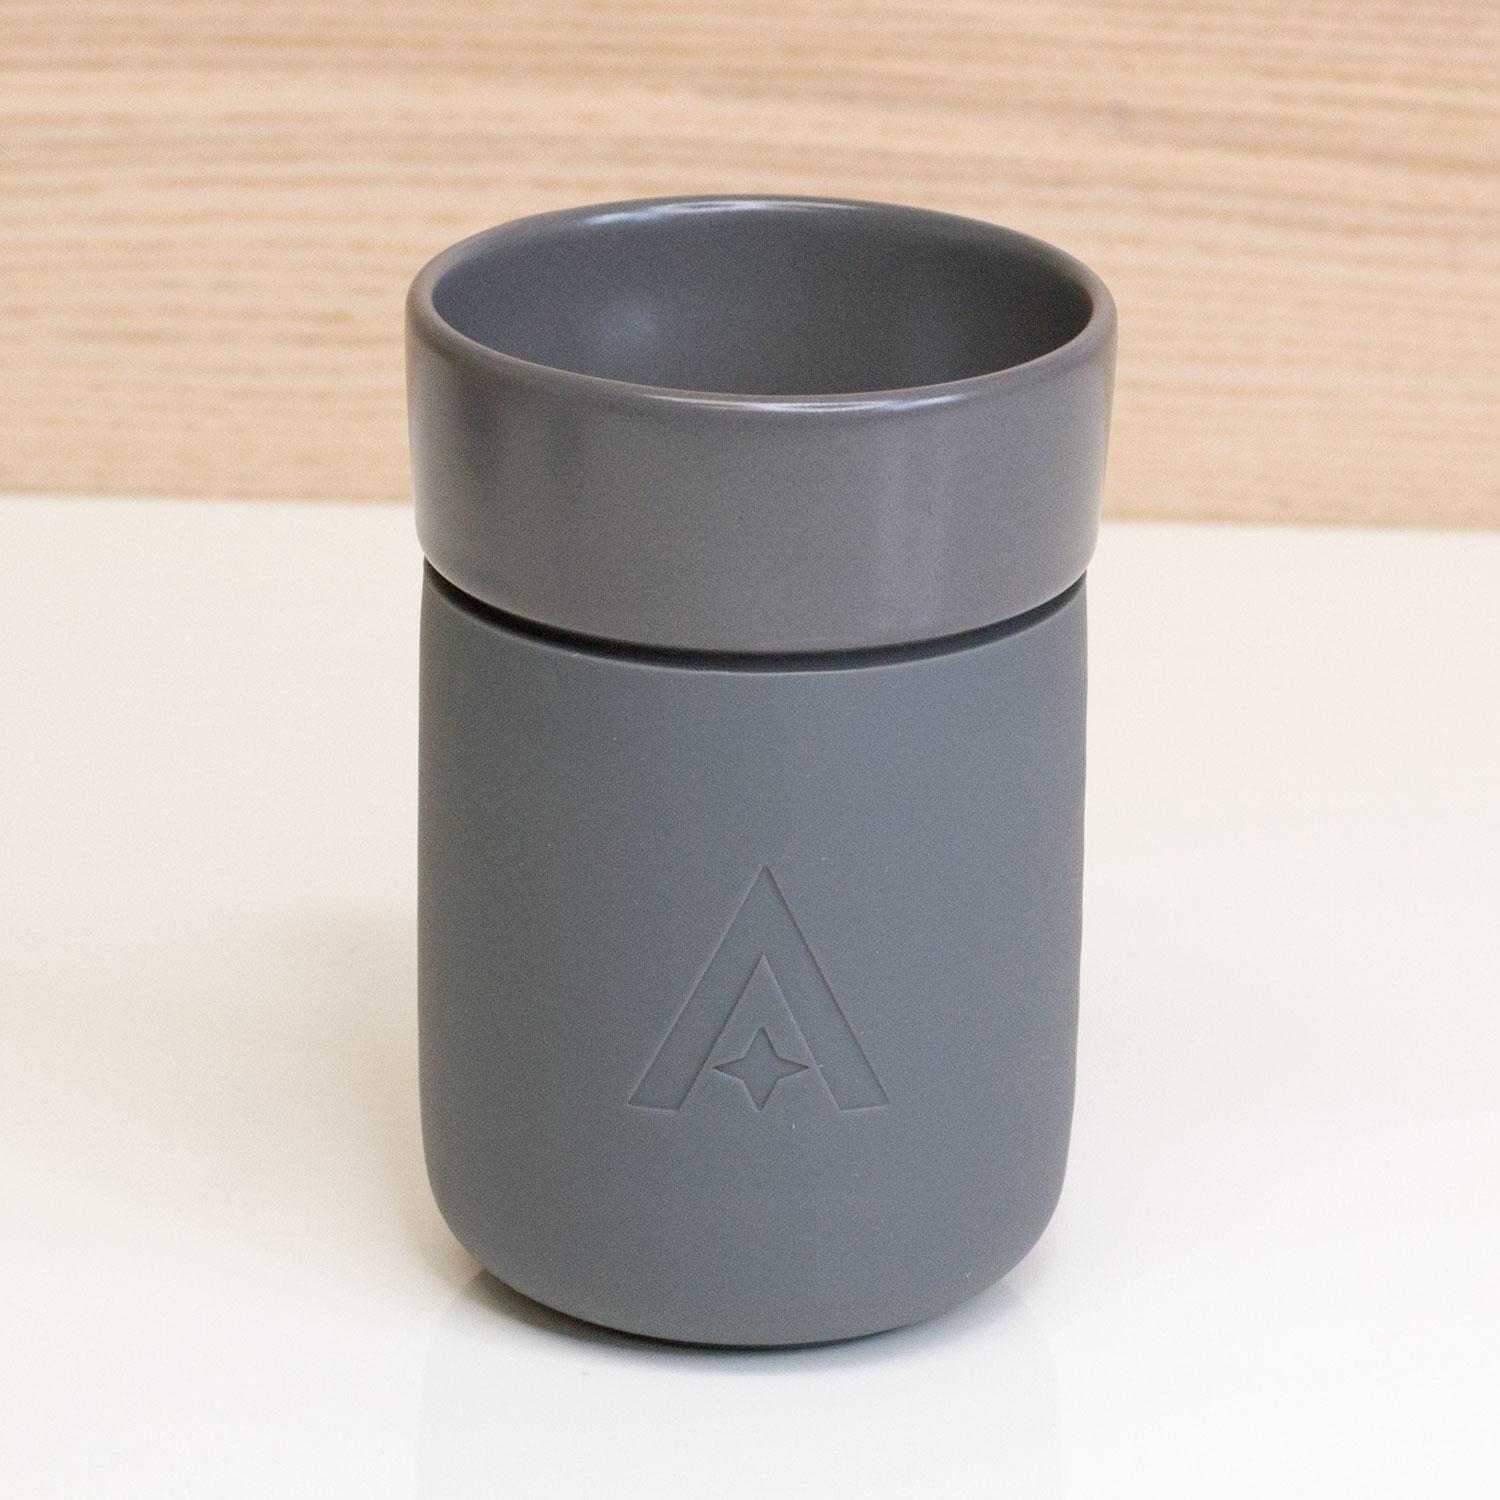 Carry Cup - The Universal Travel Mug by Uberstar (Space Grey)